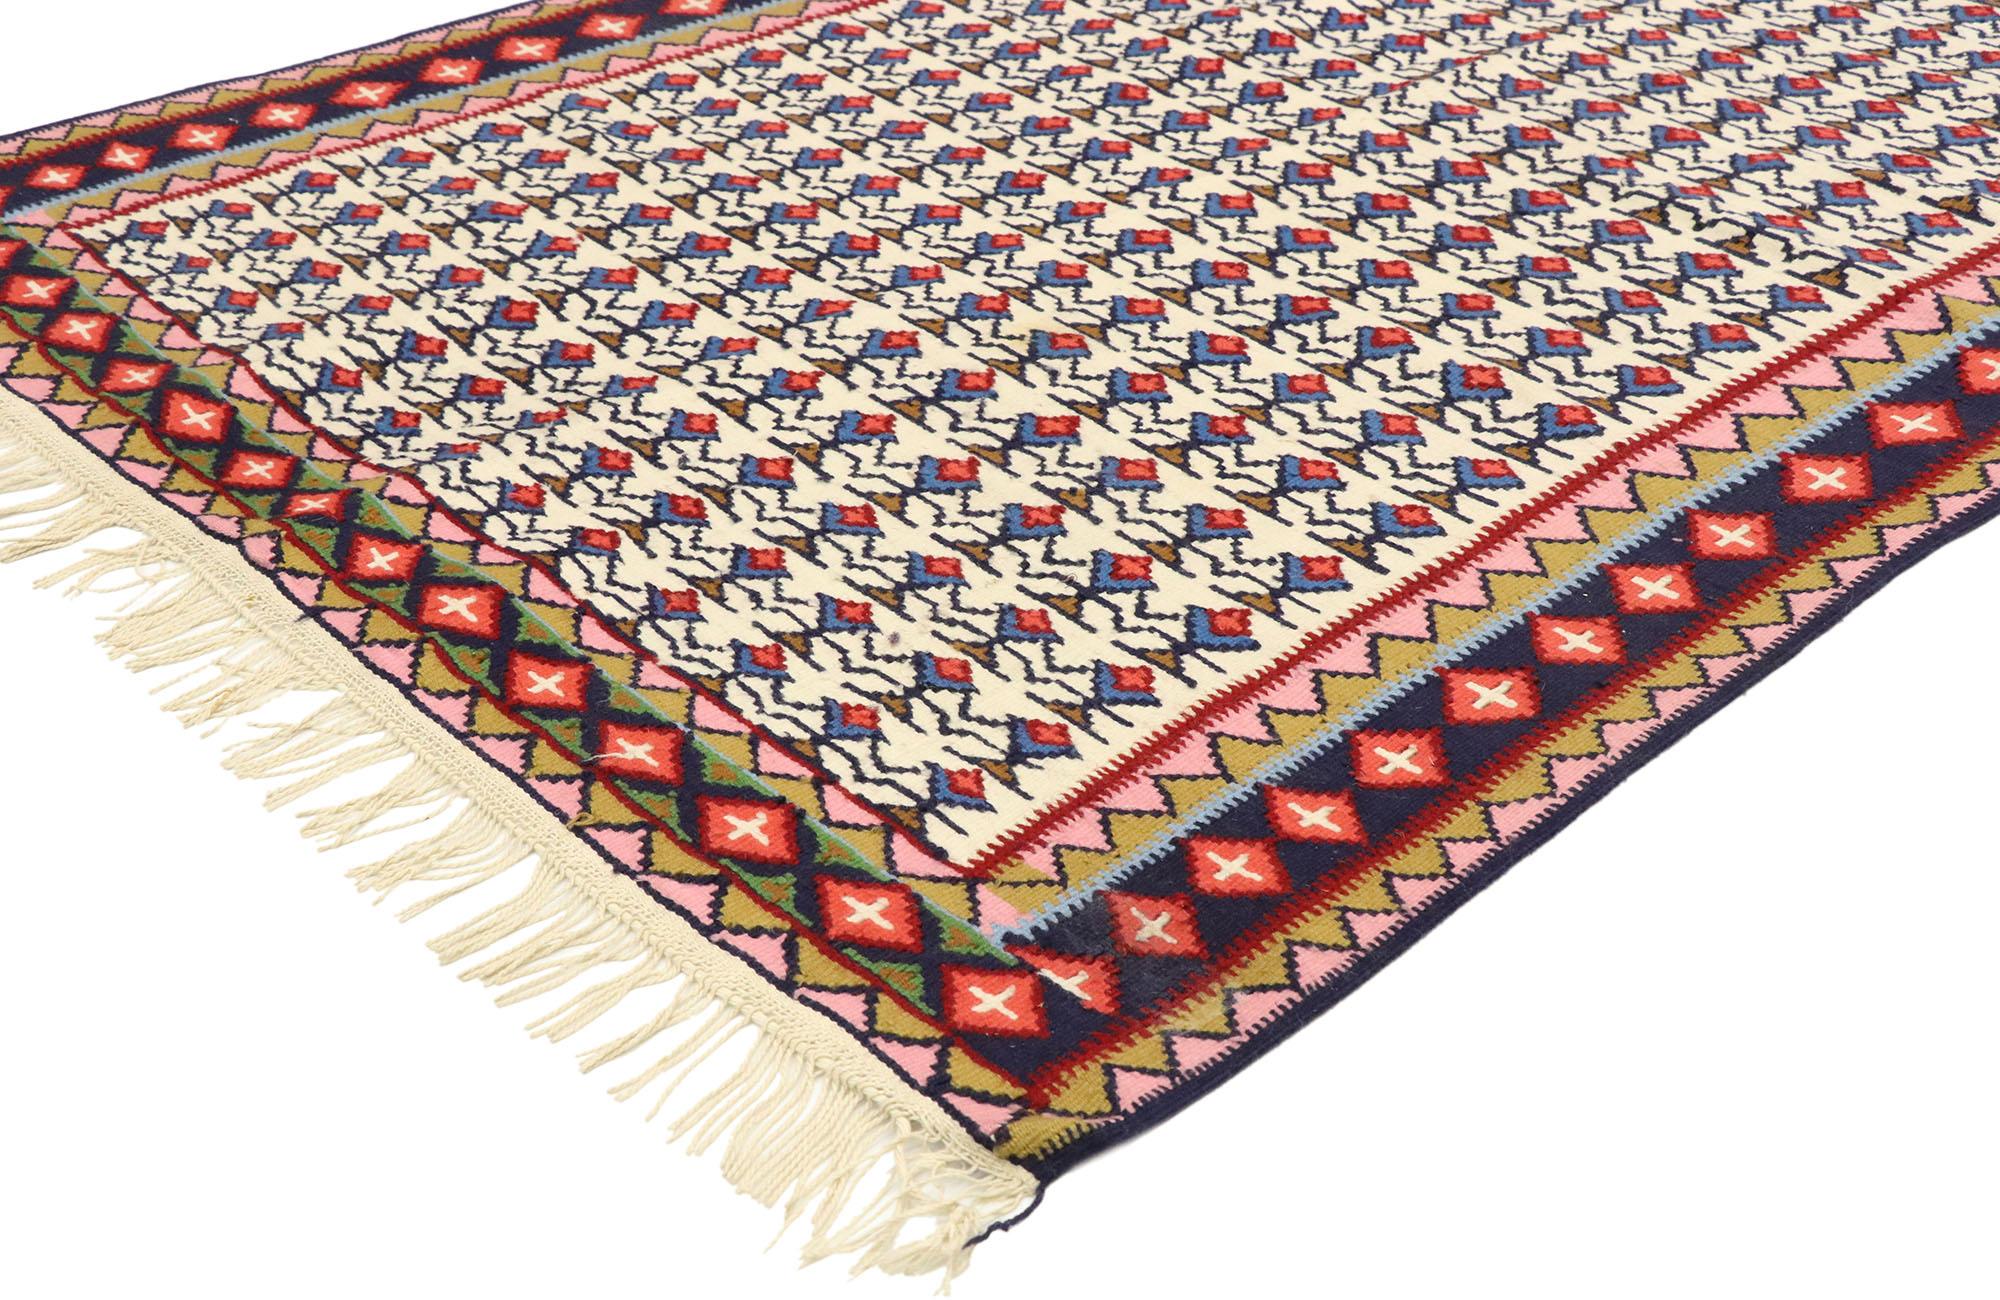 70497, vintage Persian Senneh Sanadaj Kilim rug with relaxed federal and nautical style. With rustic charm and timeless appeal, this handwoven wool vintage Persian Senneh Sanadaj Kilim accent rug can beautifully blend modern, traditional and